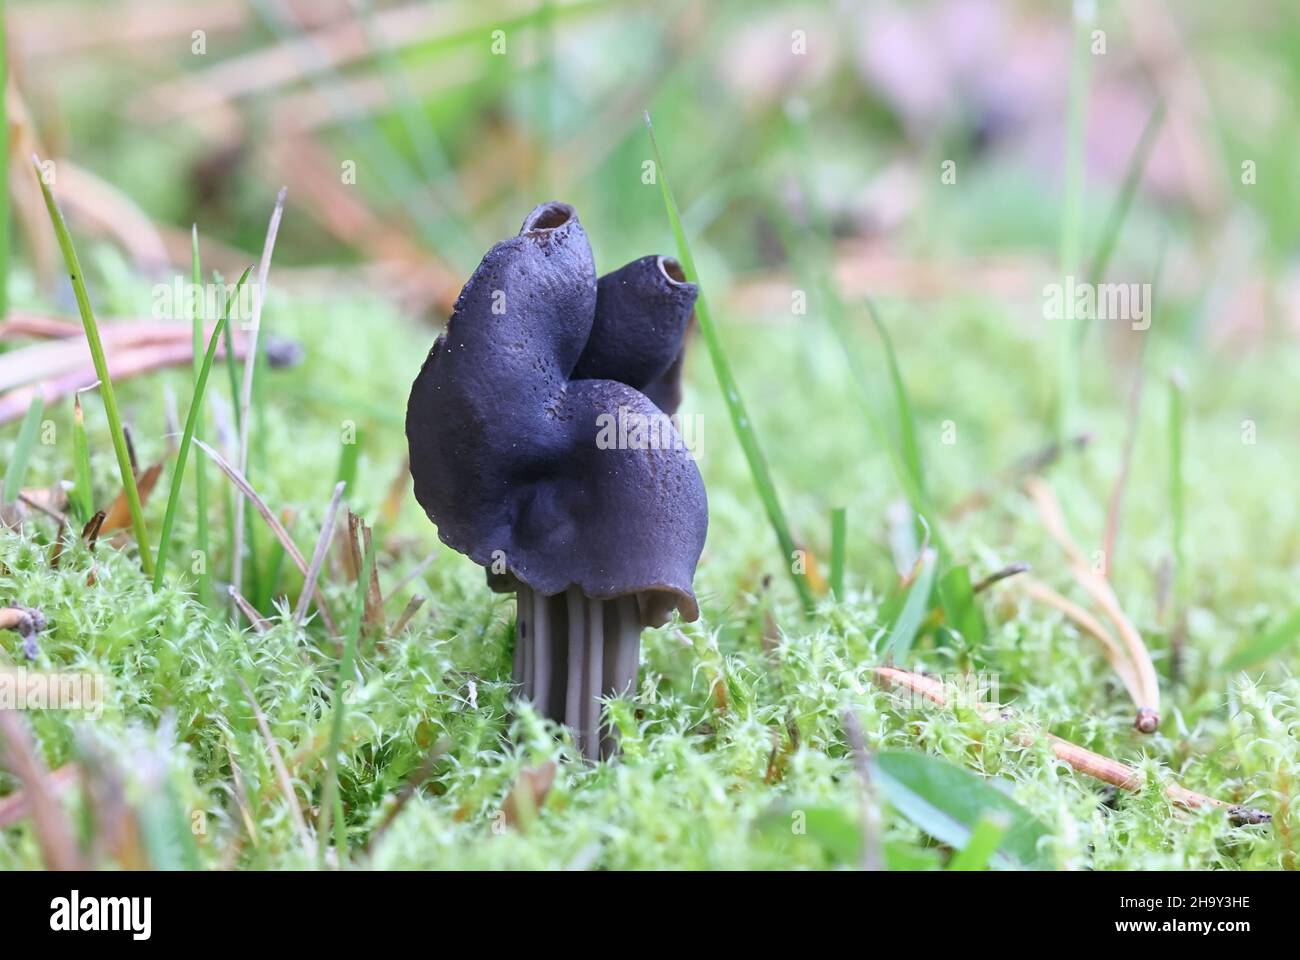 Helvella lacunosa, known as the slate grey saddle or fluted black elfin saddle, wild mushroom from Finland Stock Photo